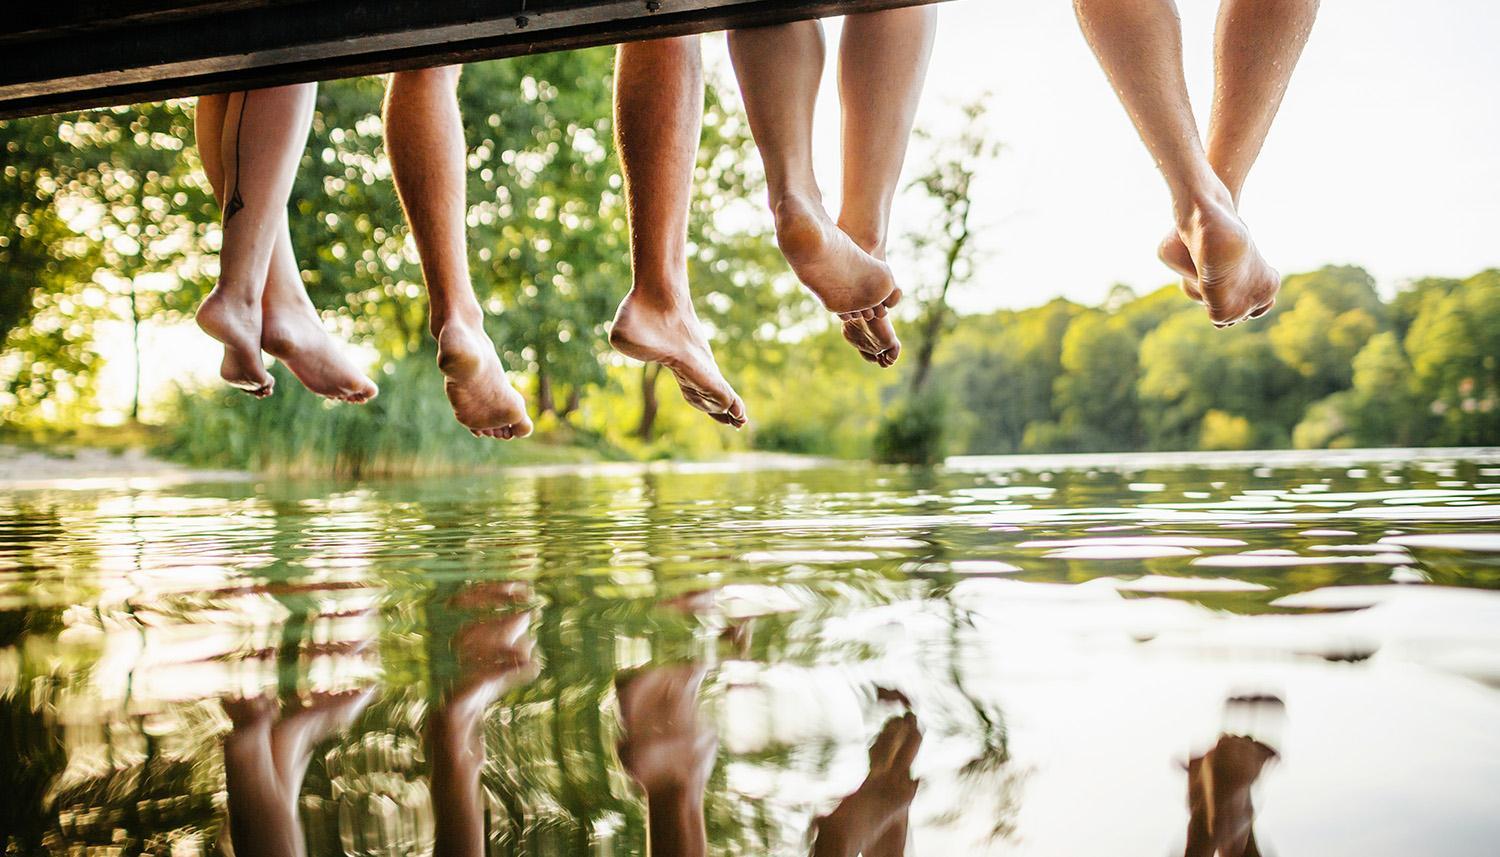 Vineyards Community, Image of children's legs and feet dangling over a river Mecklenburg County